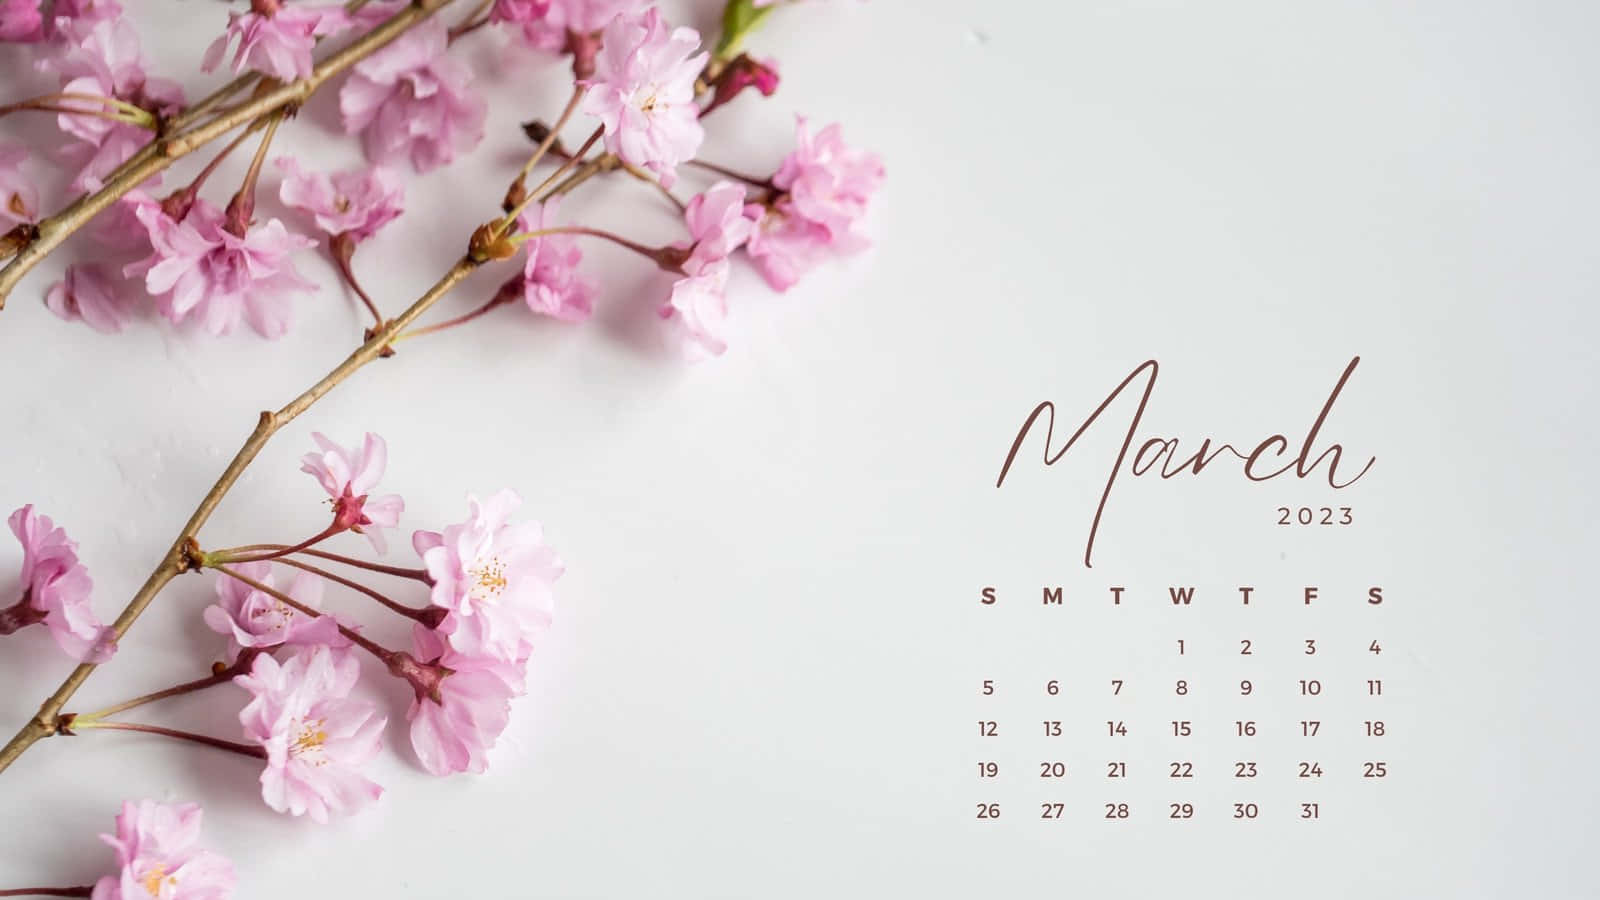 A Calendar With Pink Flowers And The Word March